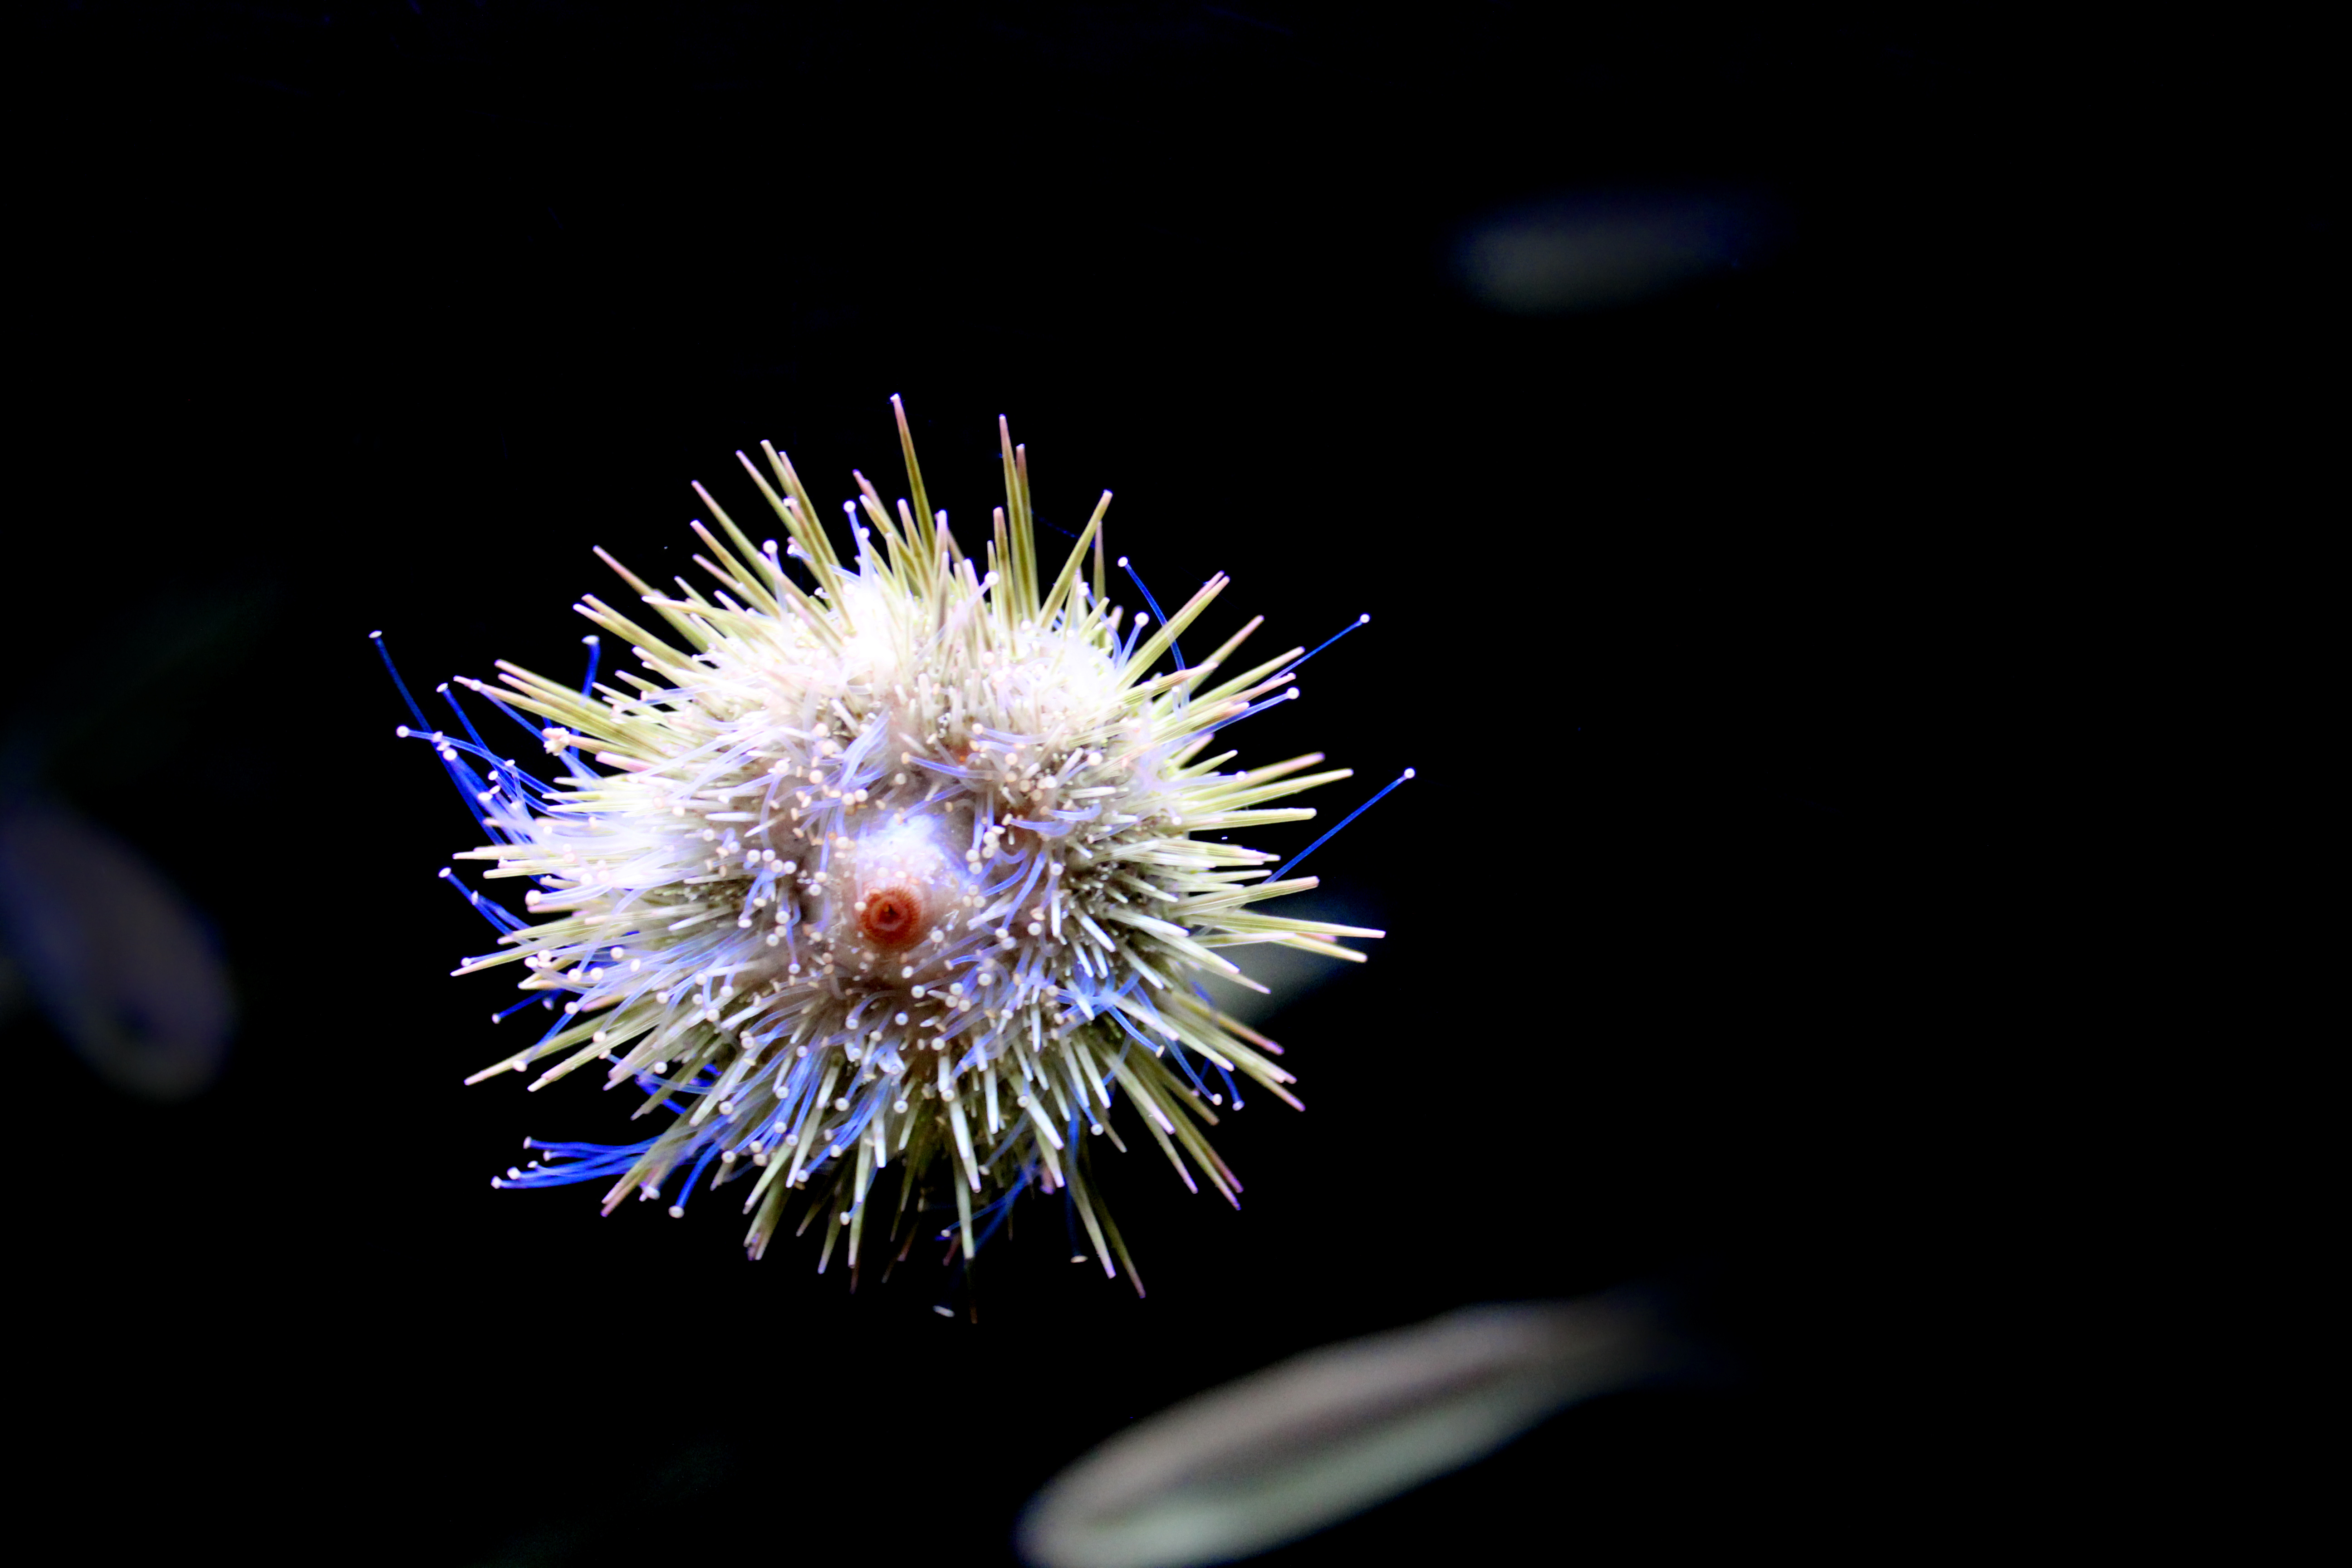 Tropical sea urchin - underbelly view showing its mouth photo